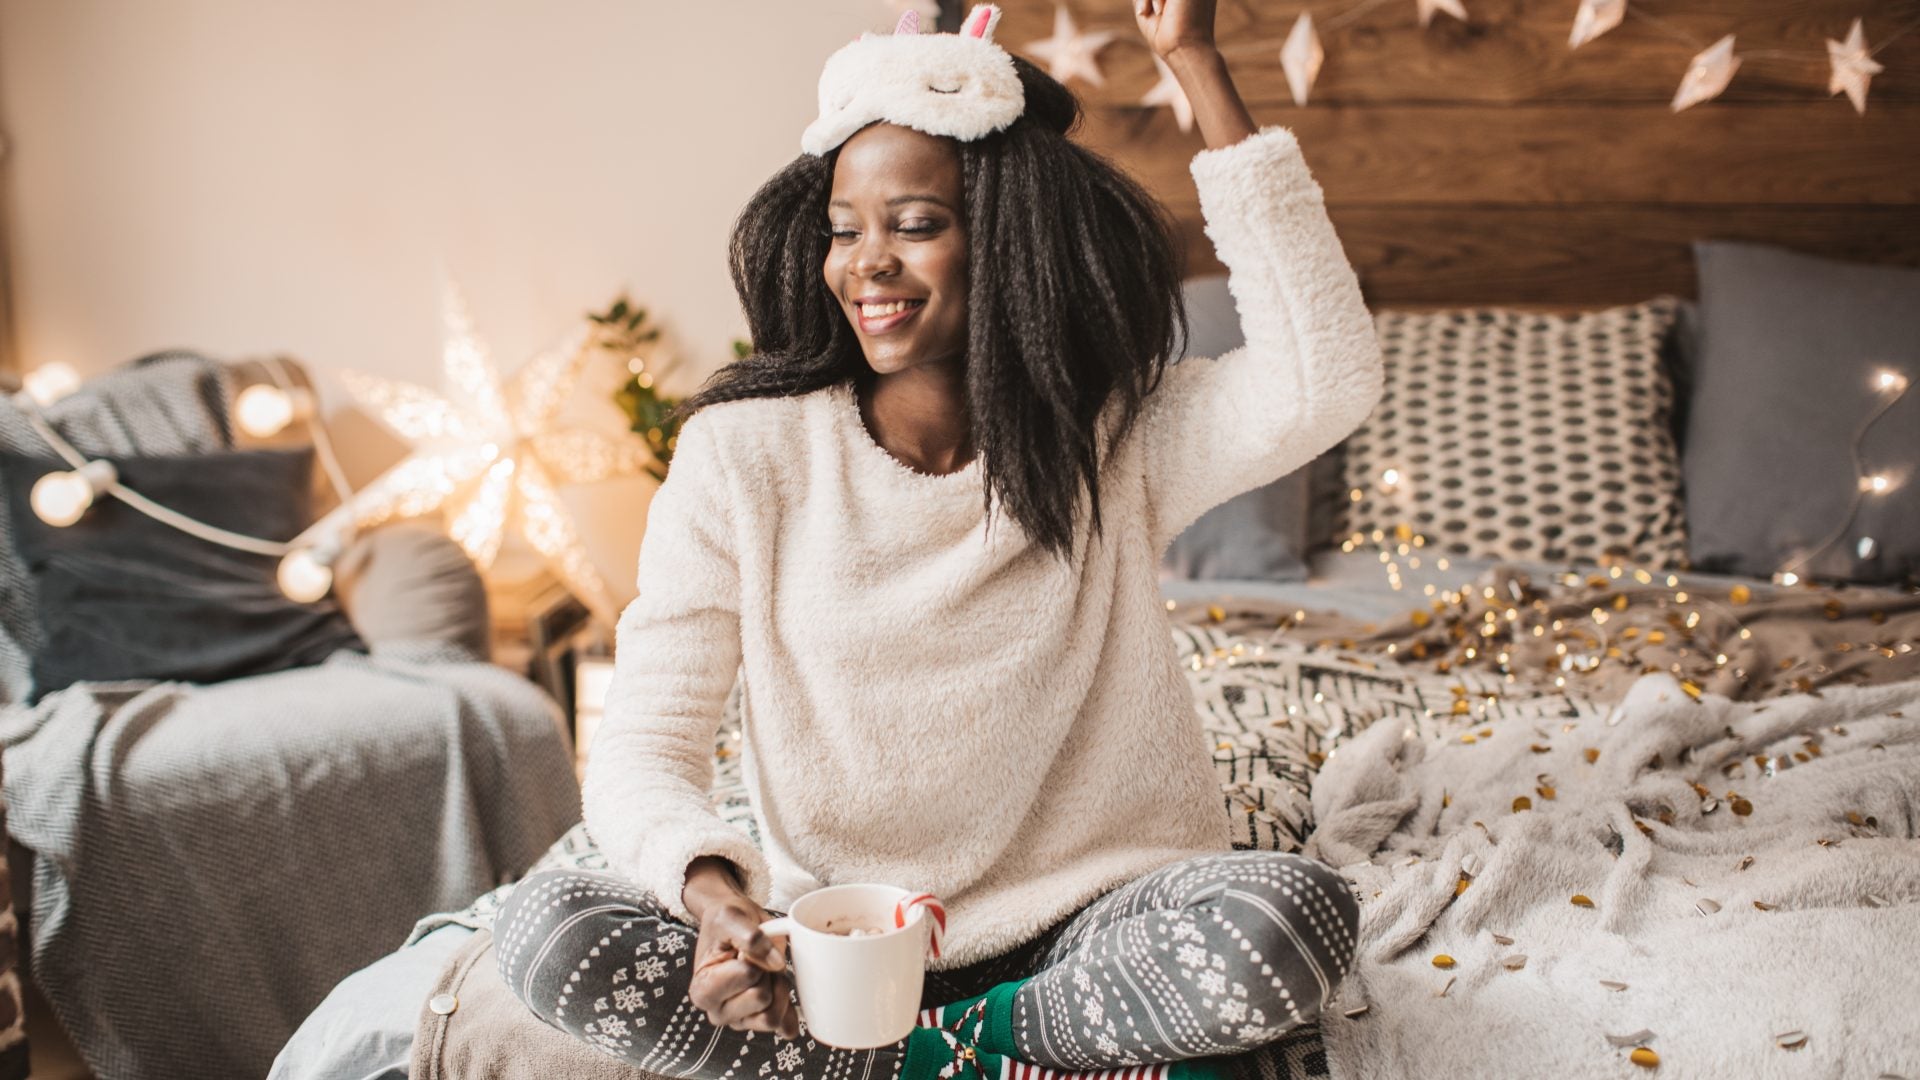 6 Ways To Make Your Home Cozier For The Holiday Season